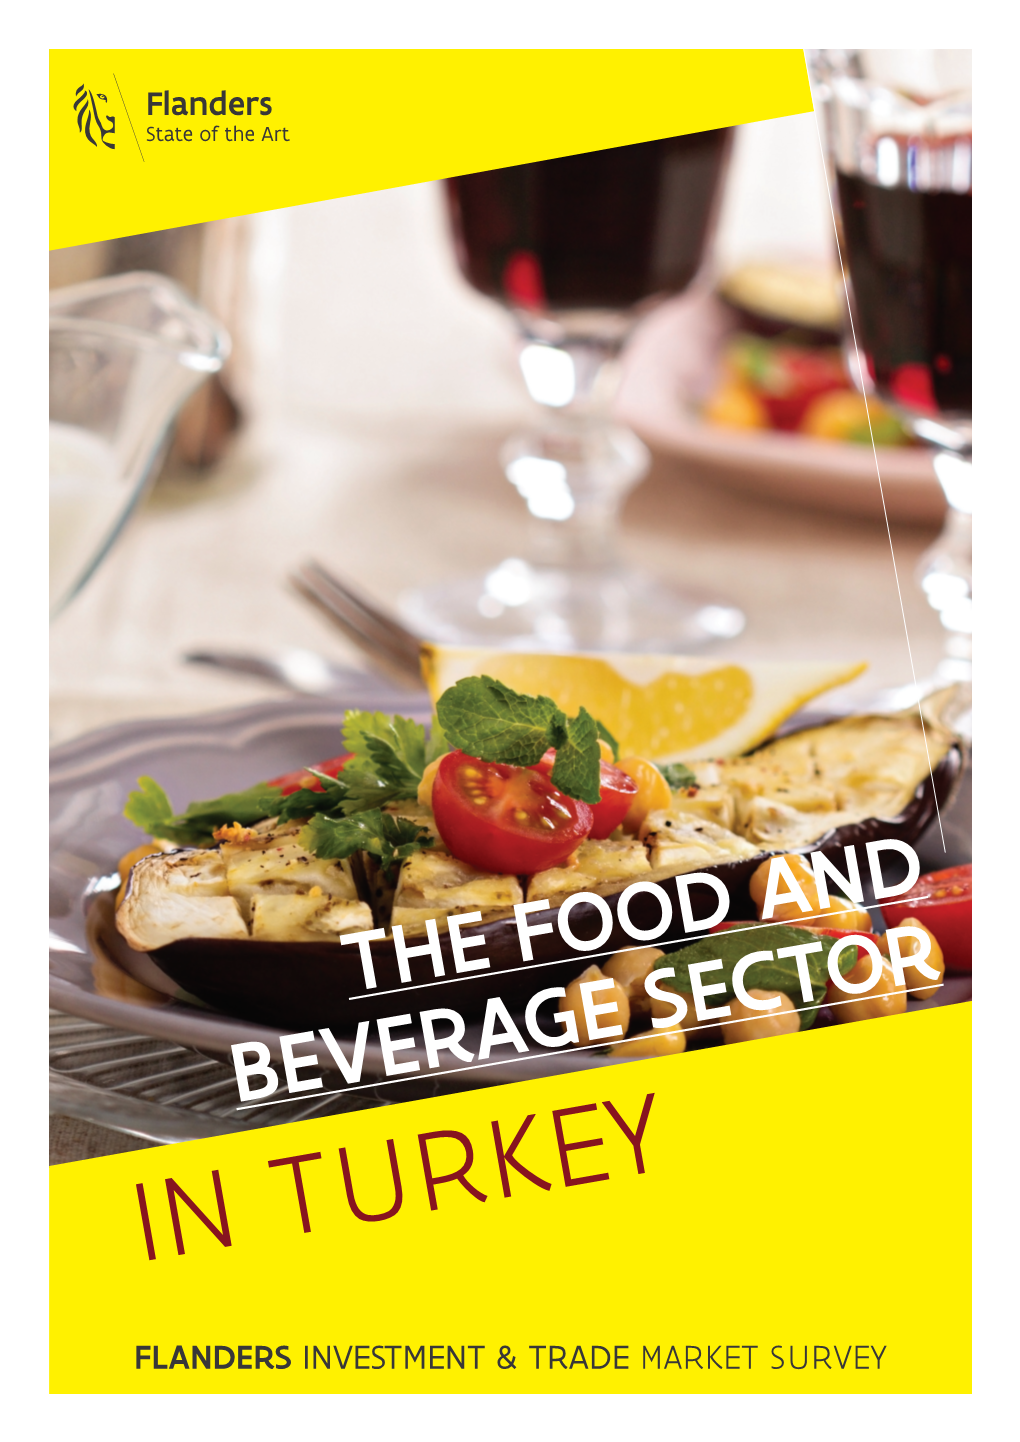 The Food and Beverage Sector in Turkey